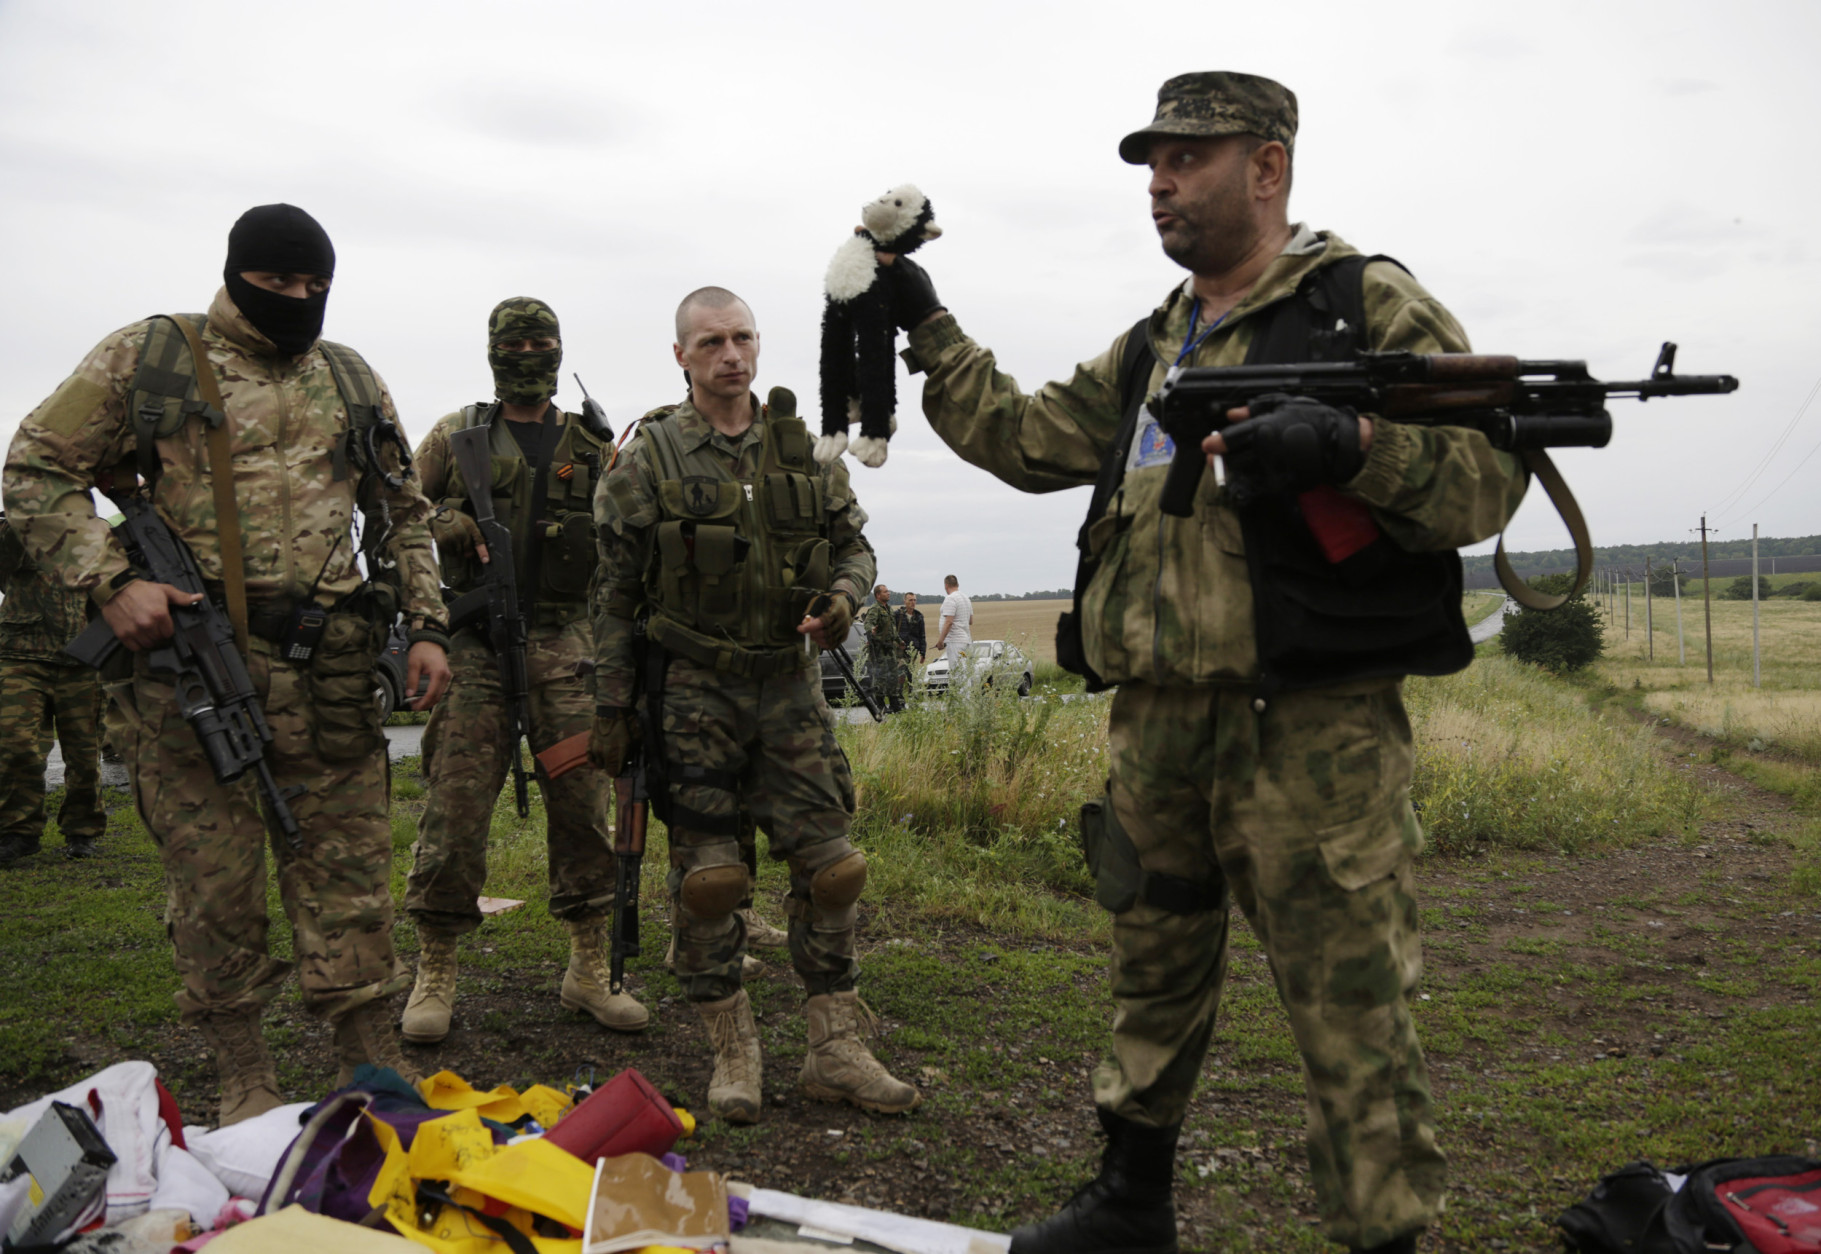 FOR USE AS DESIRED, YEAR END PHOTOS - FILE - A pro-Russian fighter holds up a toy found among the debris at the crash site of a Malaysia Airlines jet near the village of Hrabove, Friday, July 18, 2014. Emergency workers, police officers and even off-duty coal miners spread out across the sunflower fields and villages of eastern Ukraine, searching the wreckage of a Malaysia Airlines jet shot down as it flew high above the country's battlefield. The attack killed 298 people from nearly a dozen nations. (AP Photo/Dmitry Lovetsky, File)